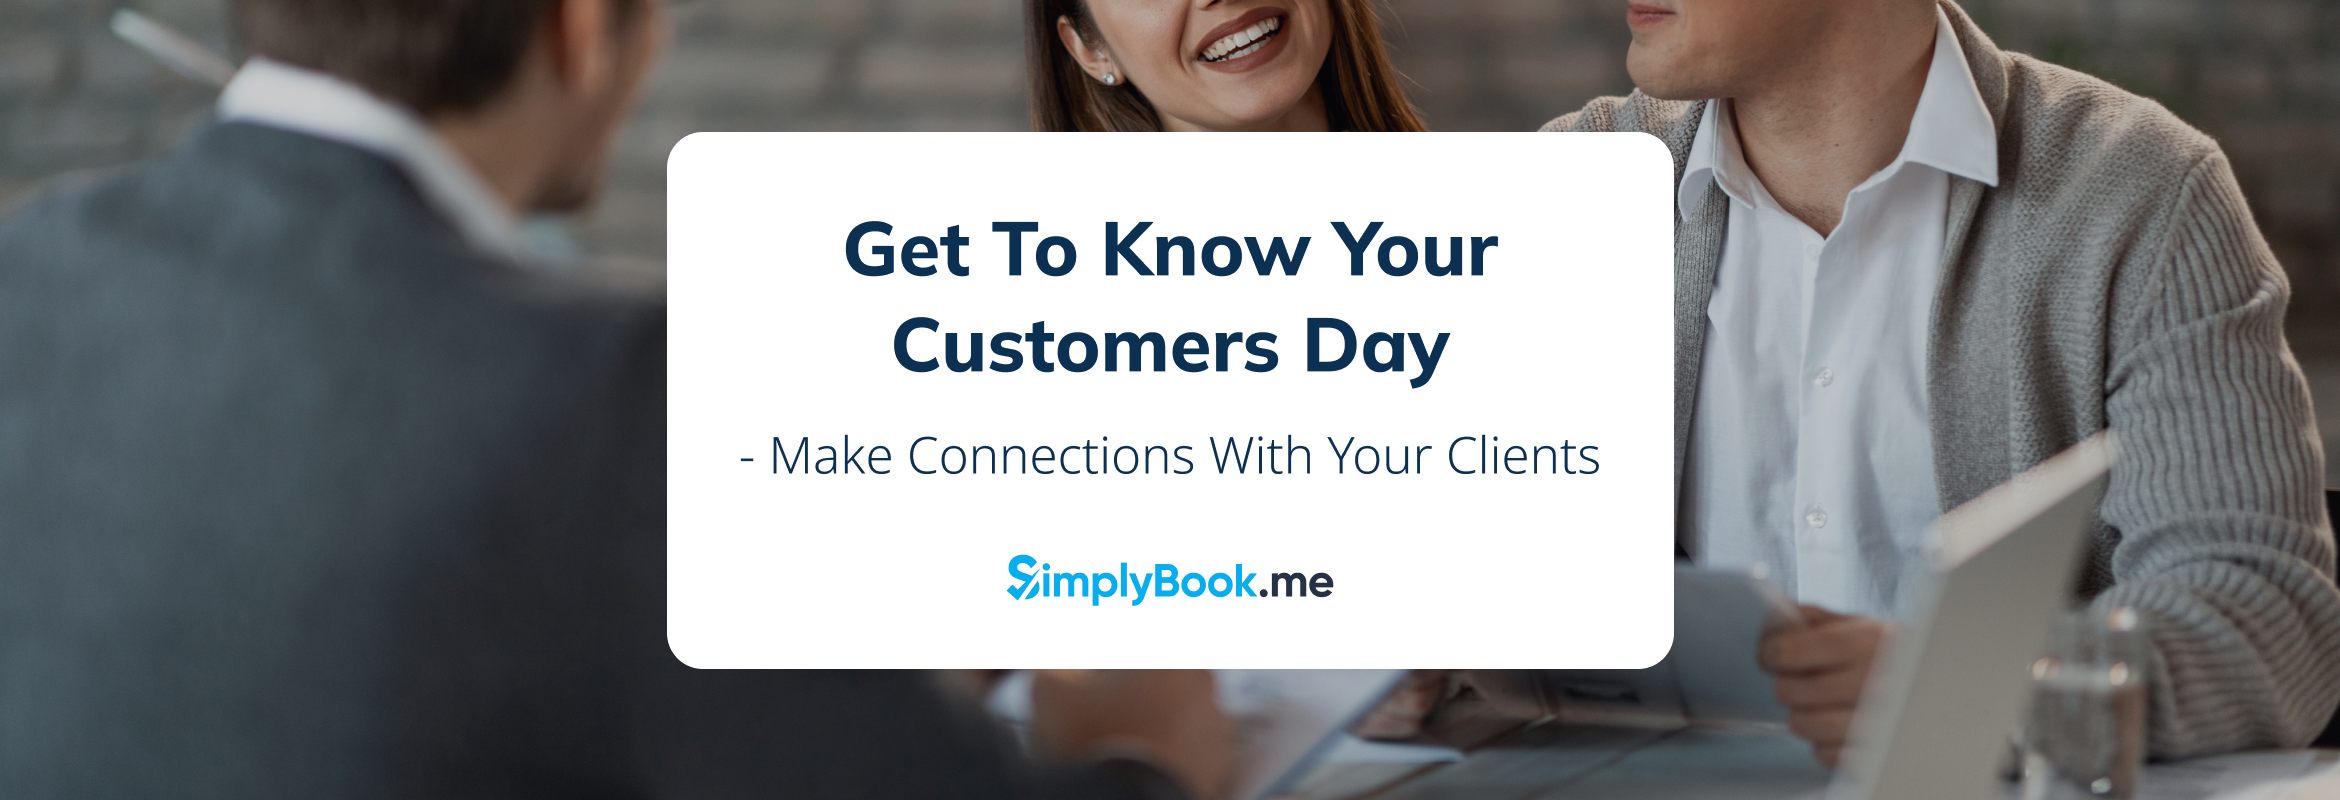 Get to know your customers day